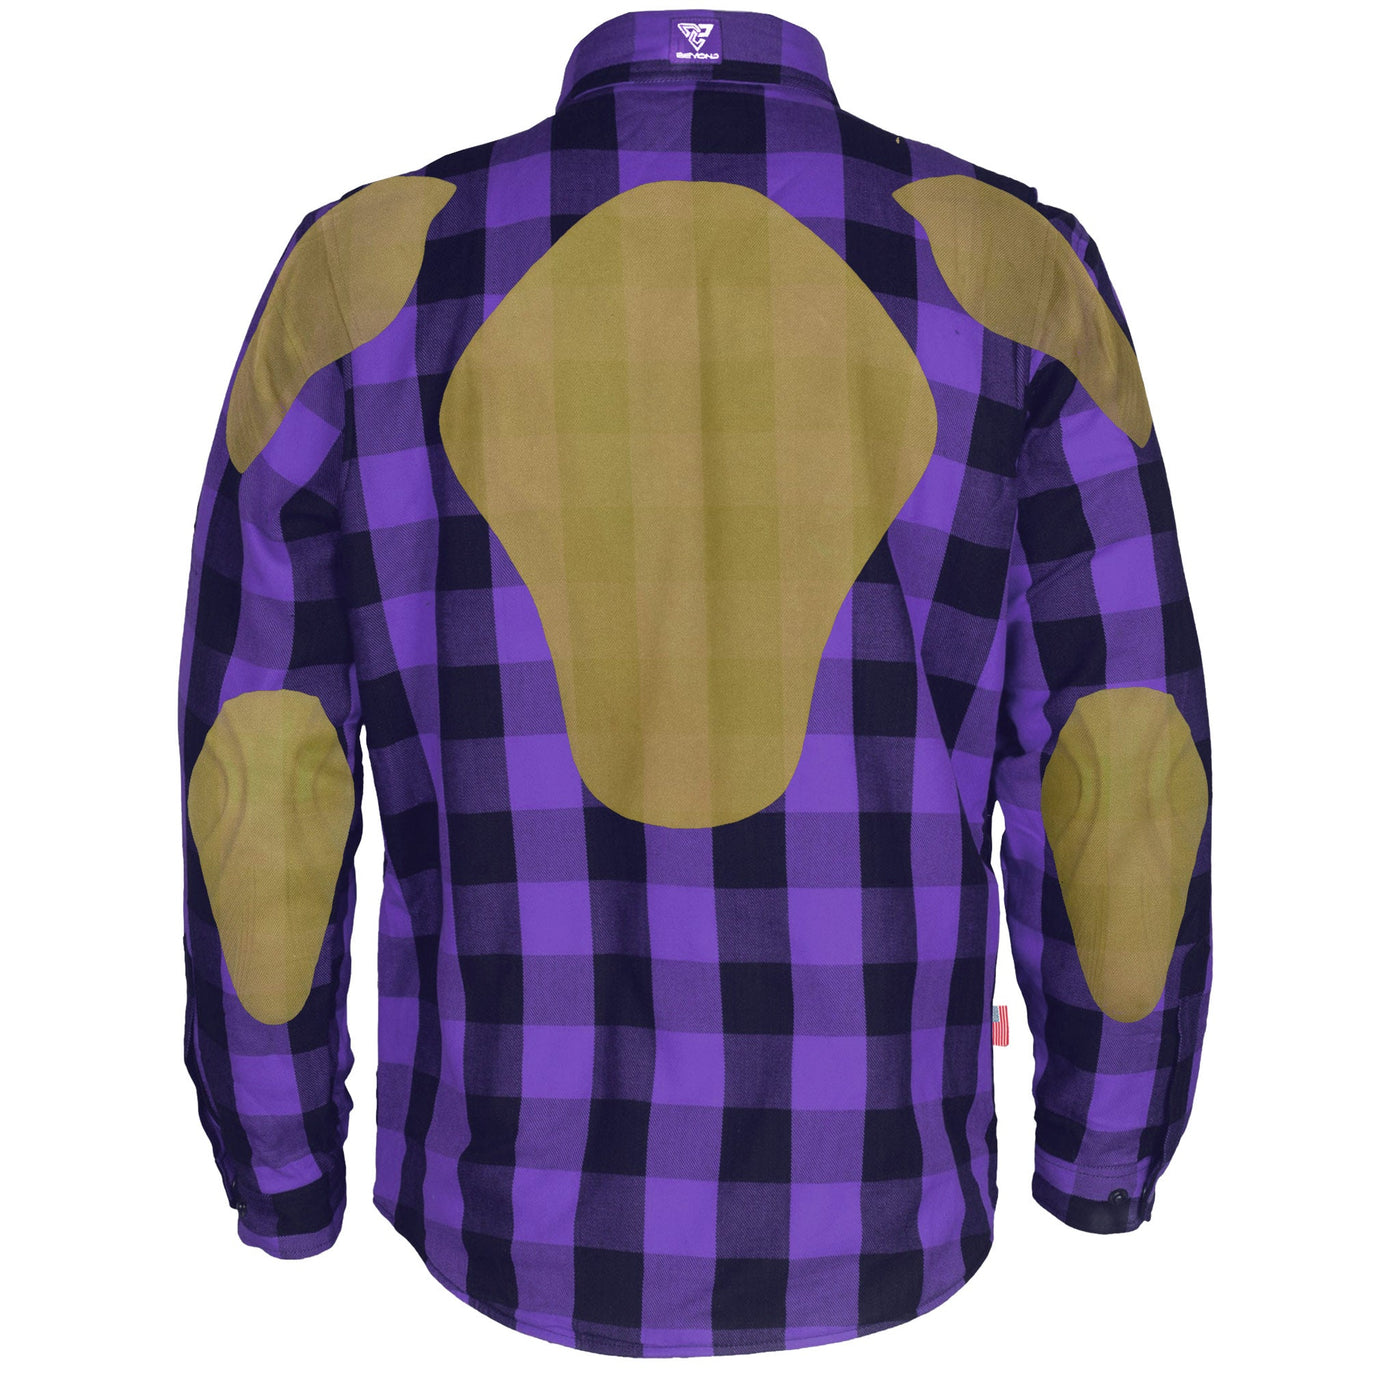 Protective Flannel Shirt with Pads "Purple Rain" - Purple and Black Checkered